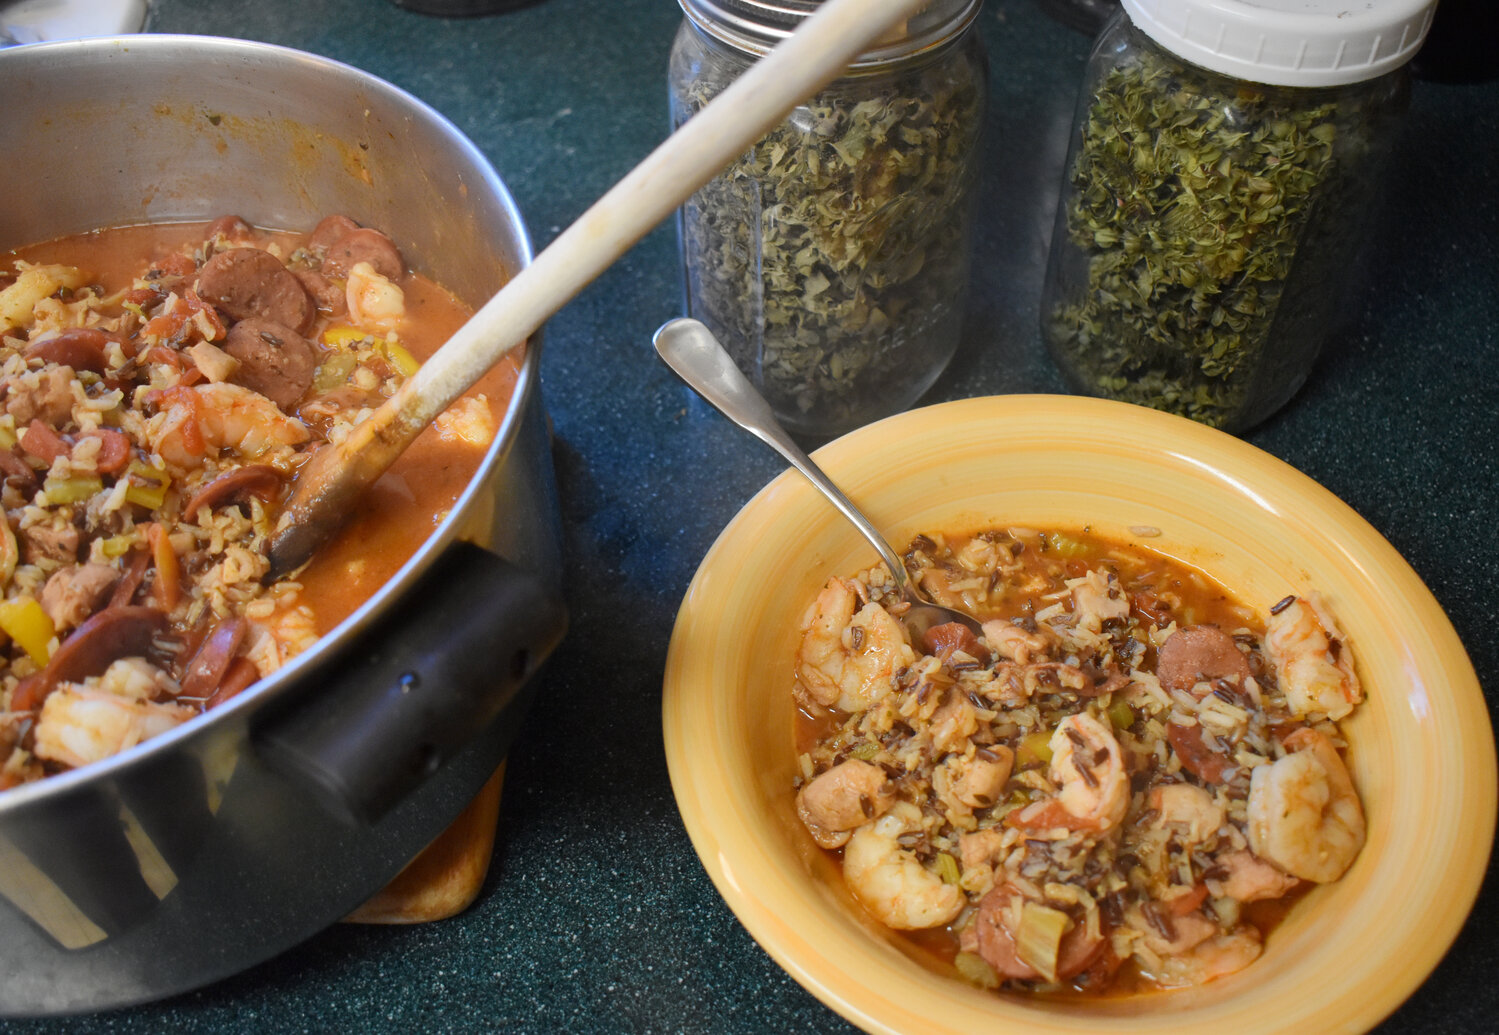 Jambalaya, like gumbo, is a dish easy to personalize, but keep in mind its roots: West African, Spanish and French flavors incorporated into Cajun or Creole cuisines.